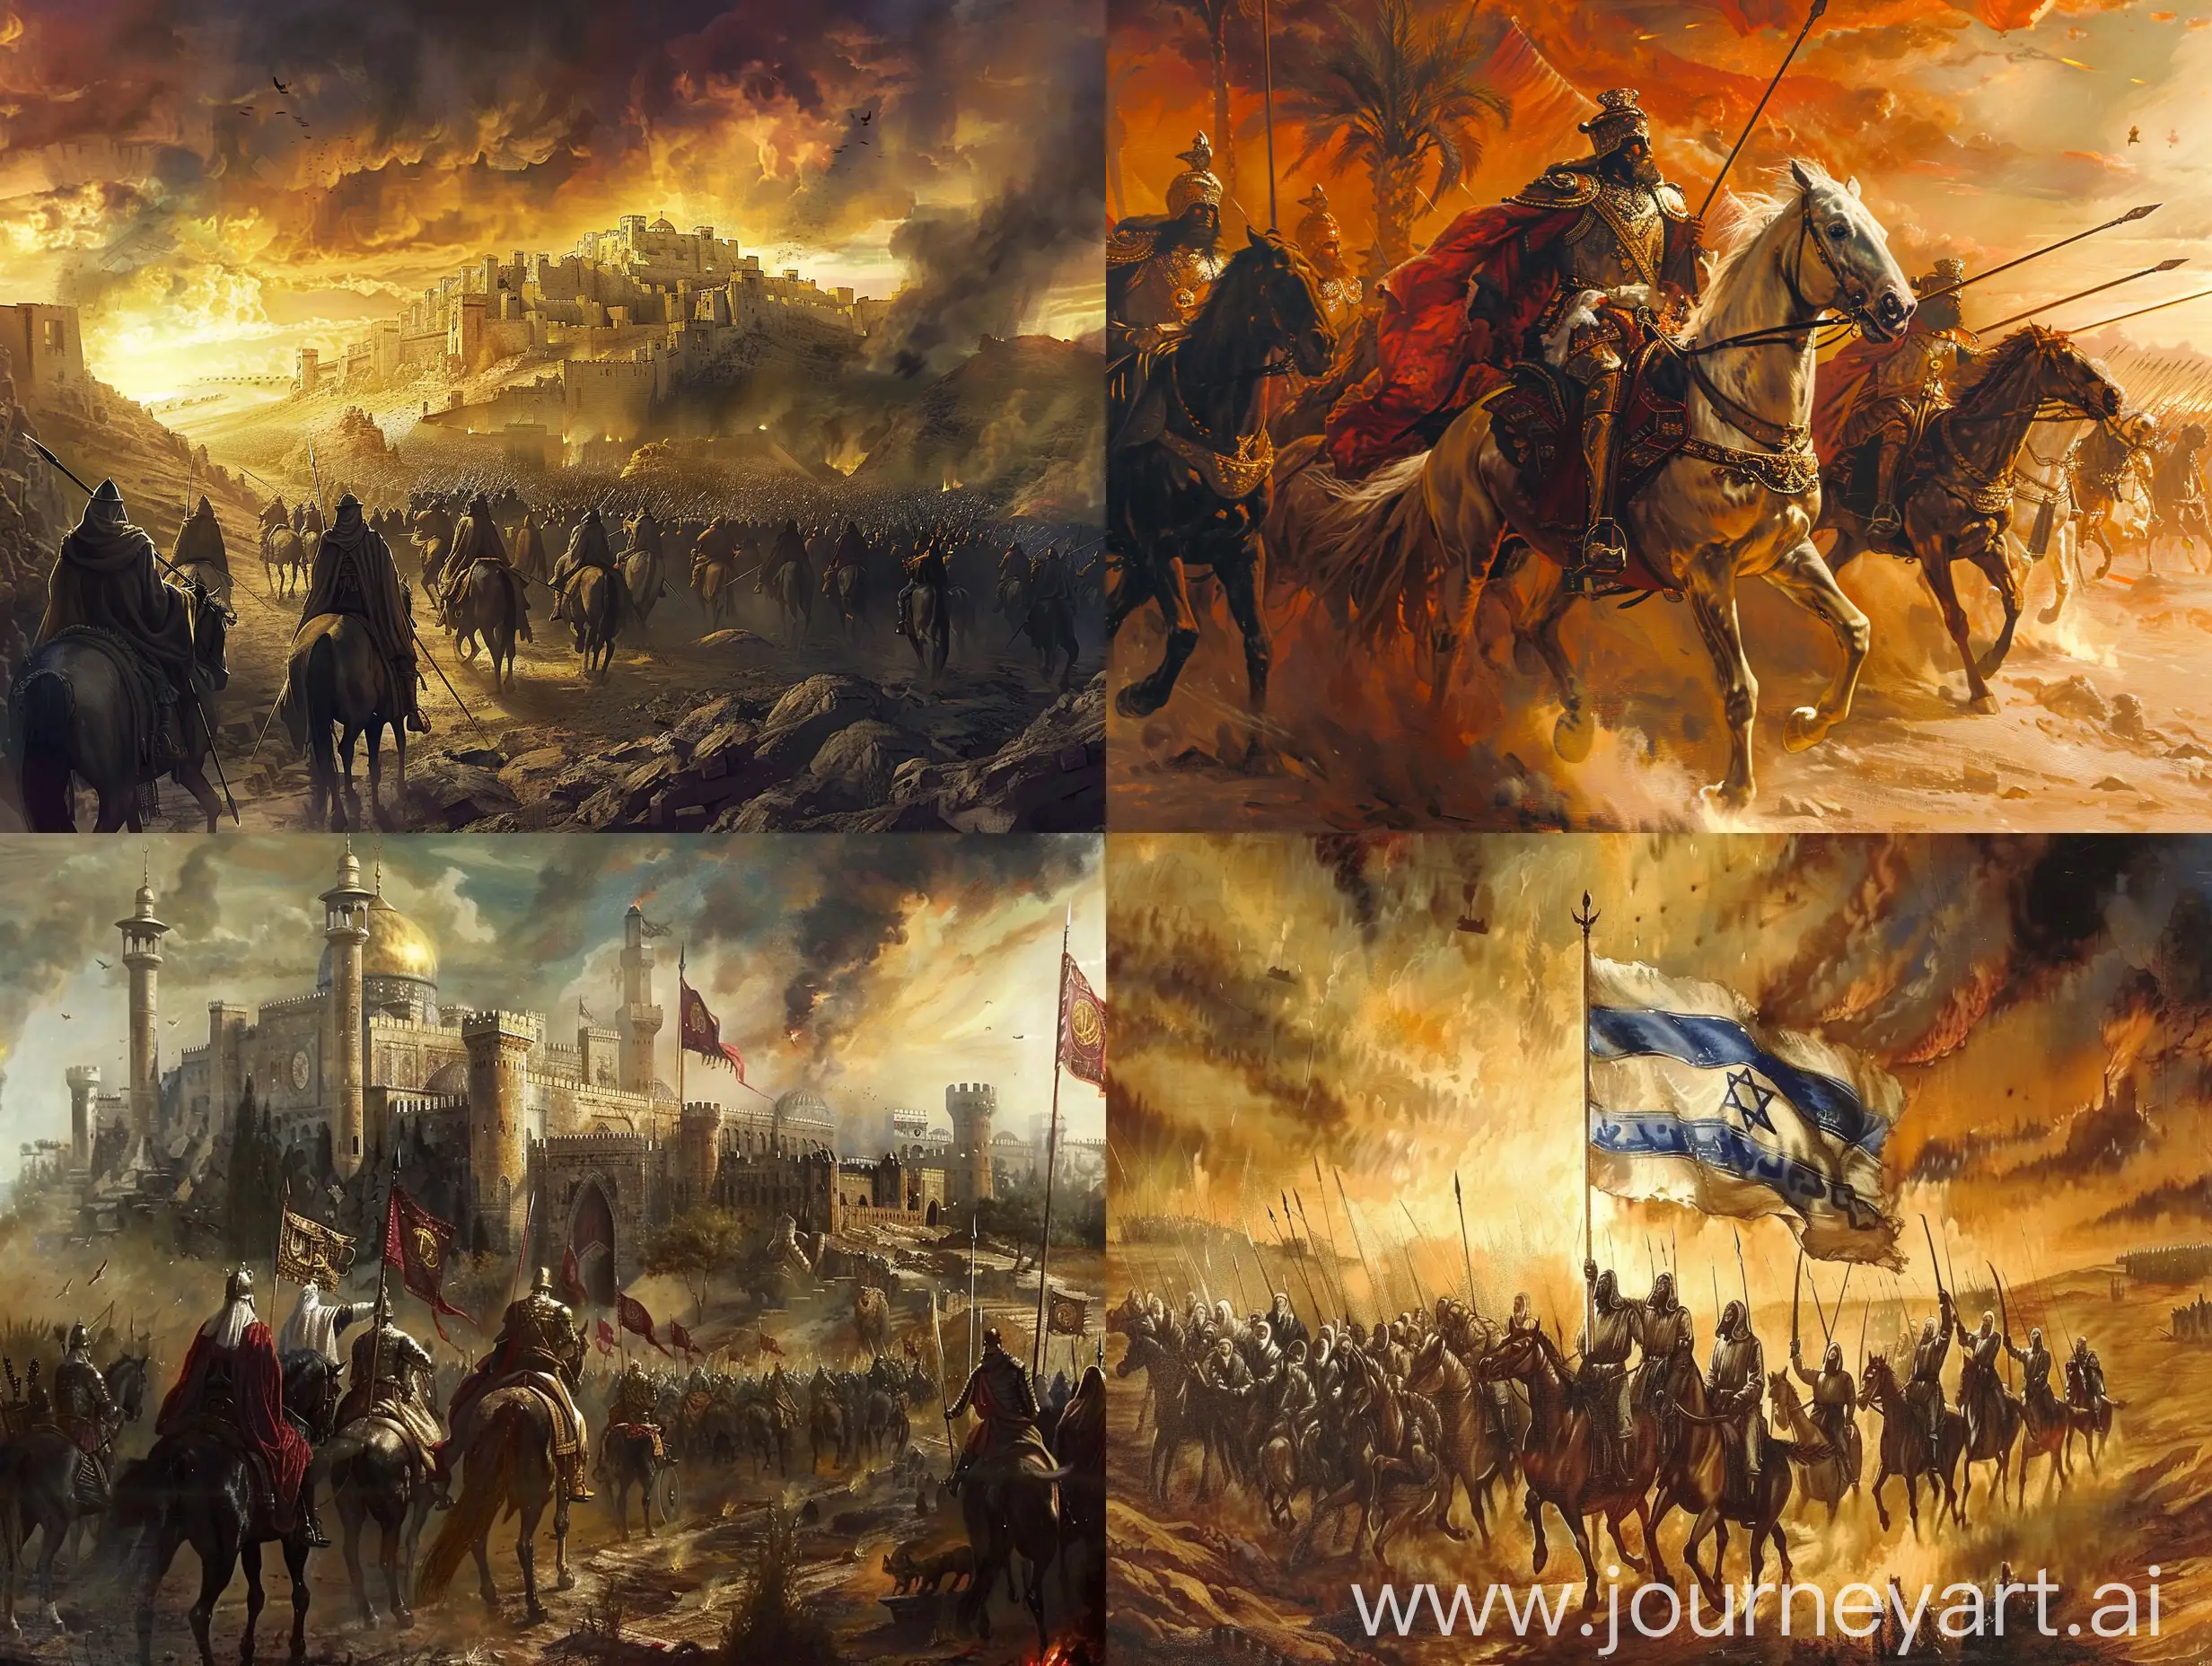 Throughout history, the Abrahamic religions of Judaism, Christianity and Islam have spread through war and conquest. This fact is consistent with both our historical knowledge and the sacred texts of these religions. For example, in the Old Testament, "God is a warrior" (Exodus 15:3). This verse supports the idea that war and military power are related to God's will.